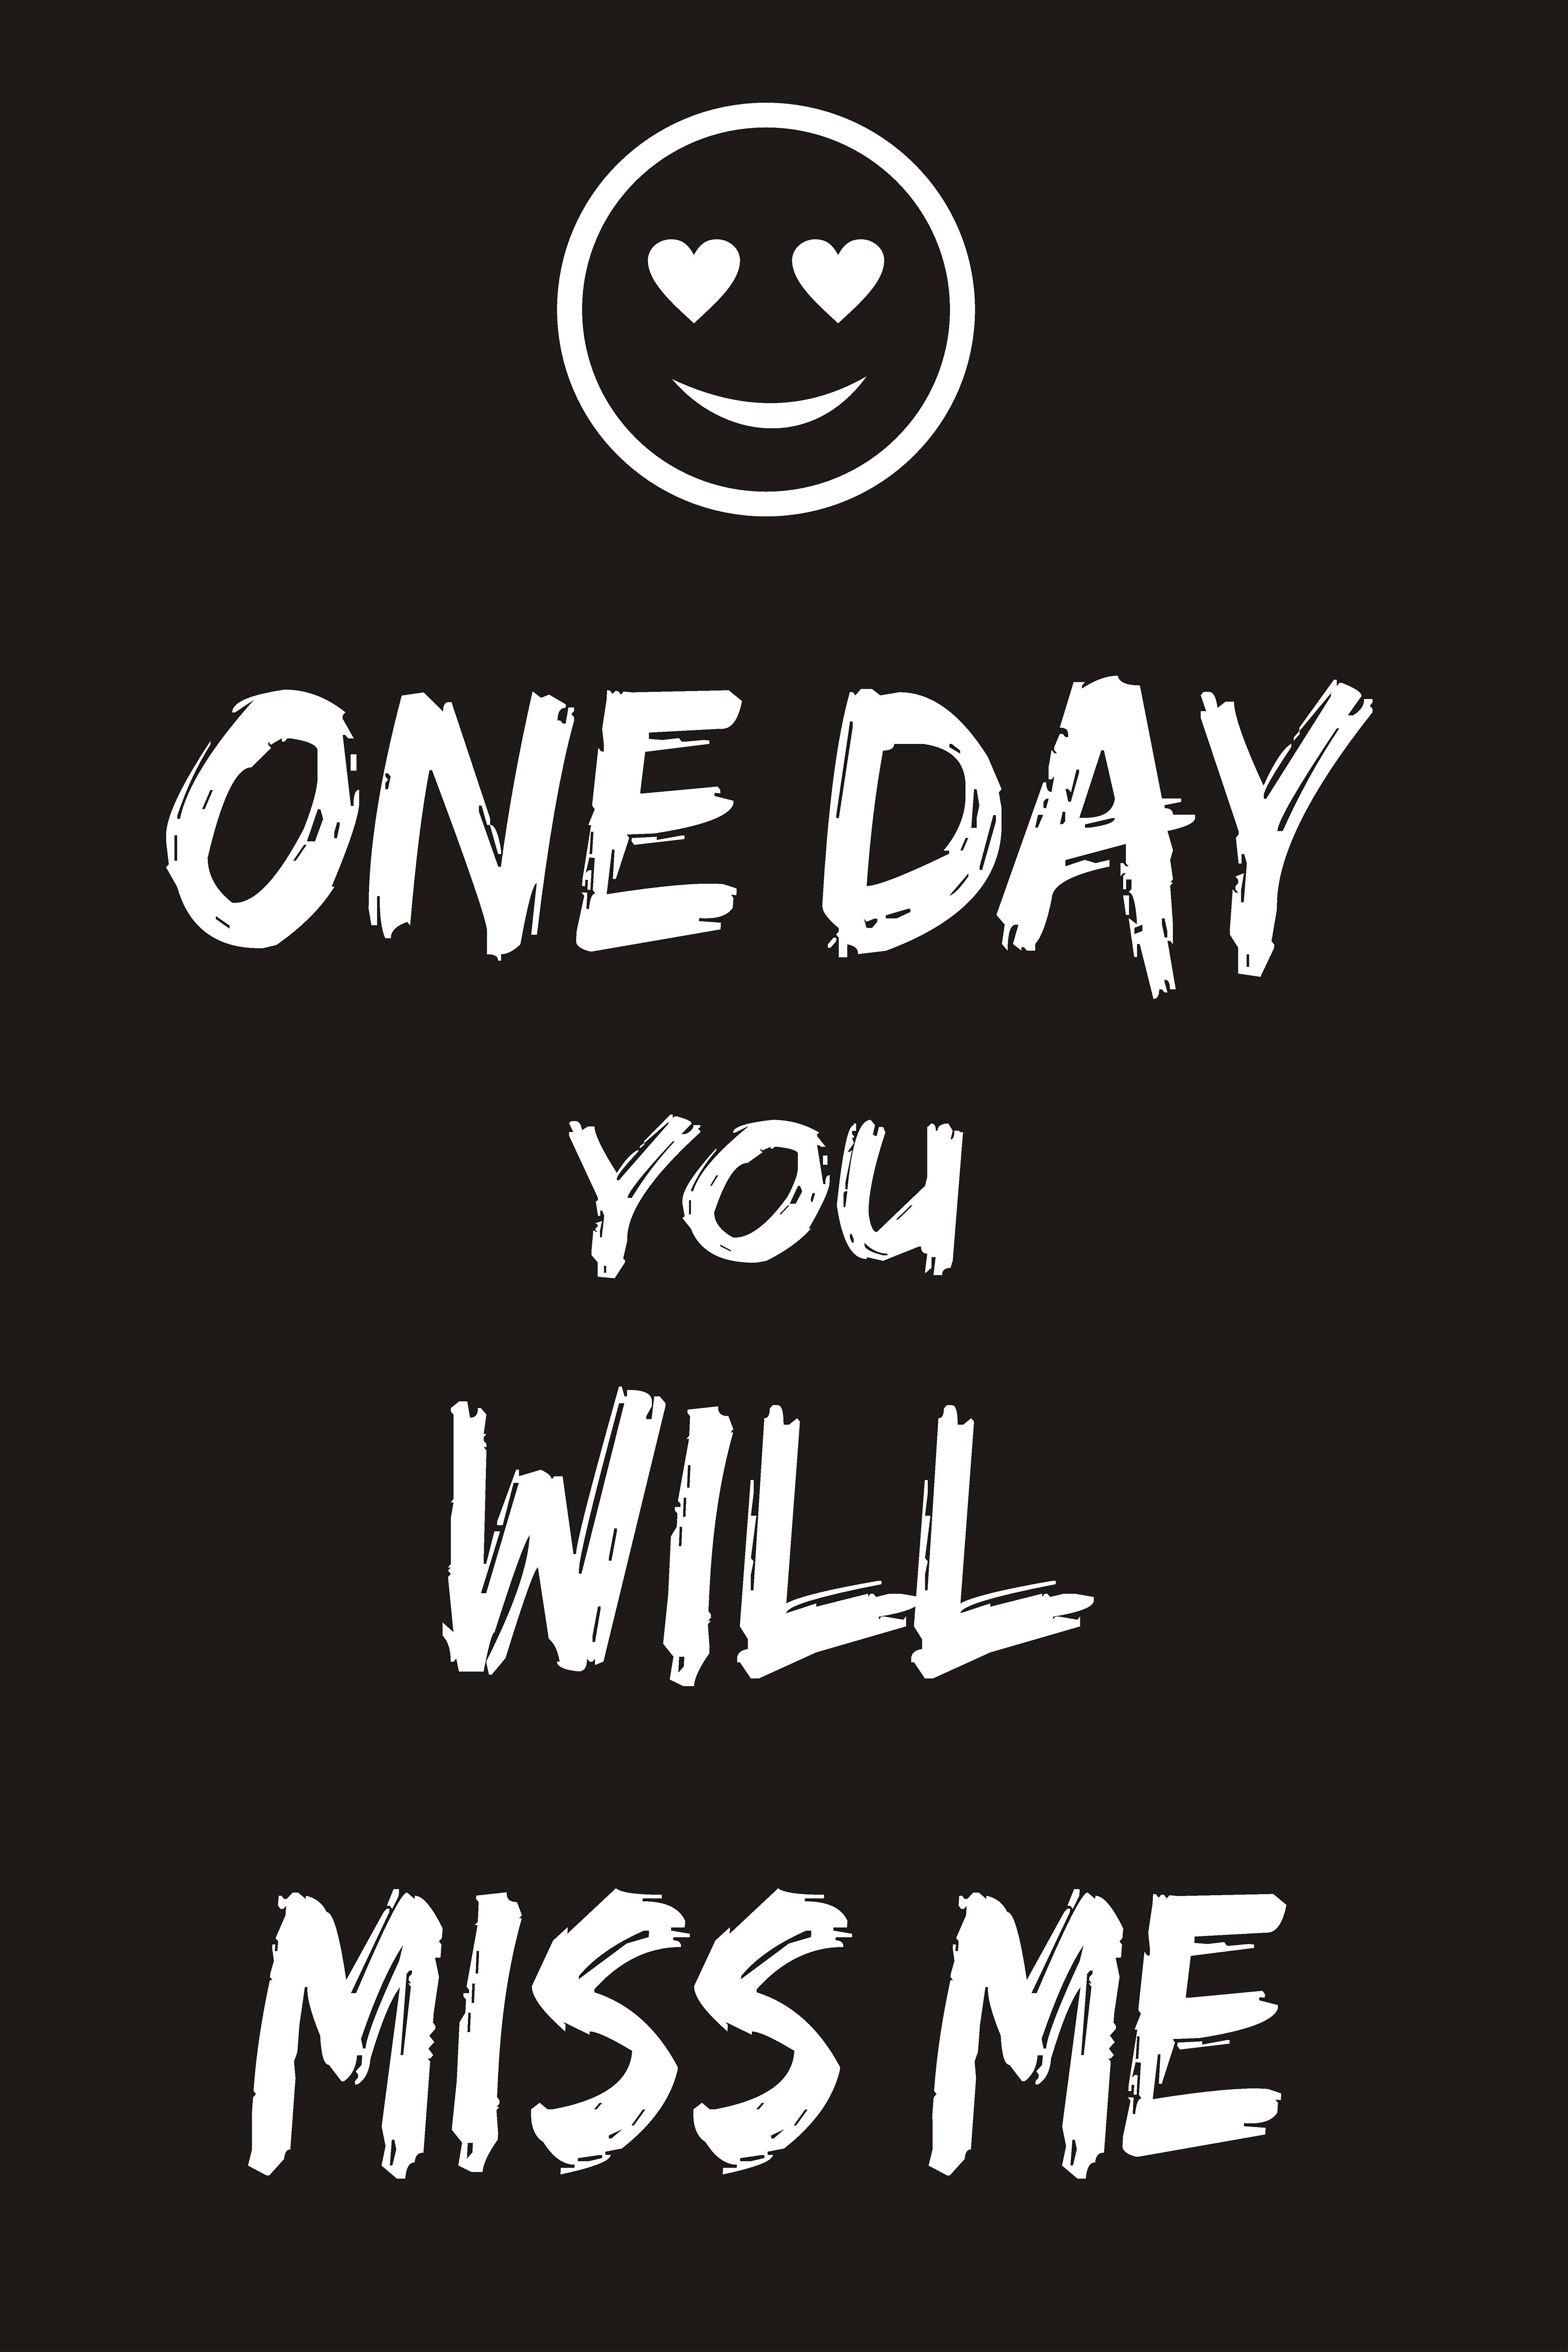 Yellow Alley Quote Poster|Funny Quote|One Day You Will Miss Me Paper Wall  Poster Without Frame: Buy Yellow Alley Quote Poster|Funny Quote|One Day You  Will Miss Me Paper Wall Poster Without Frame at